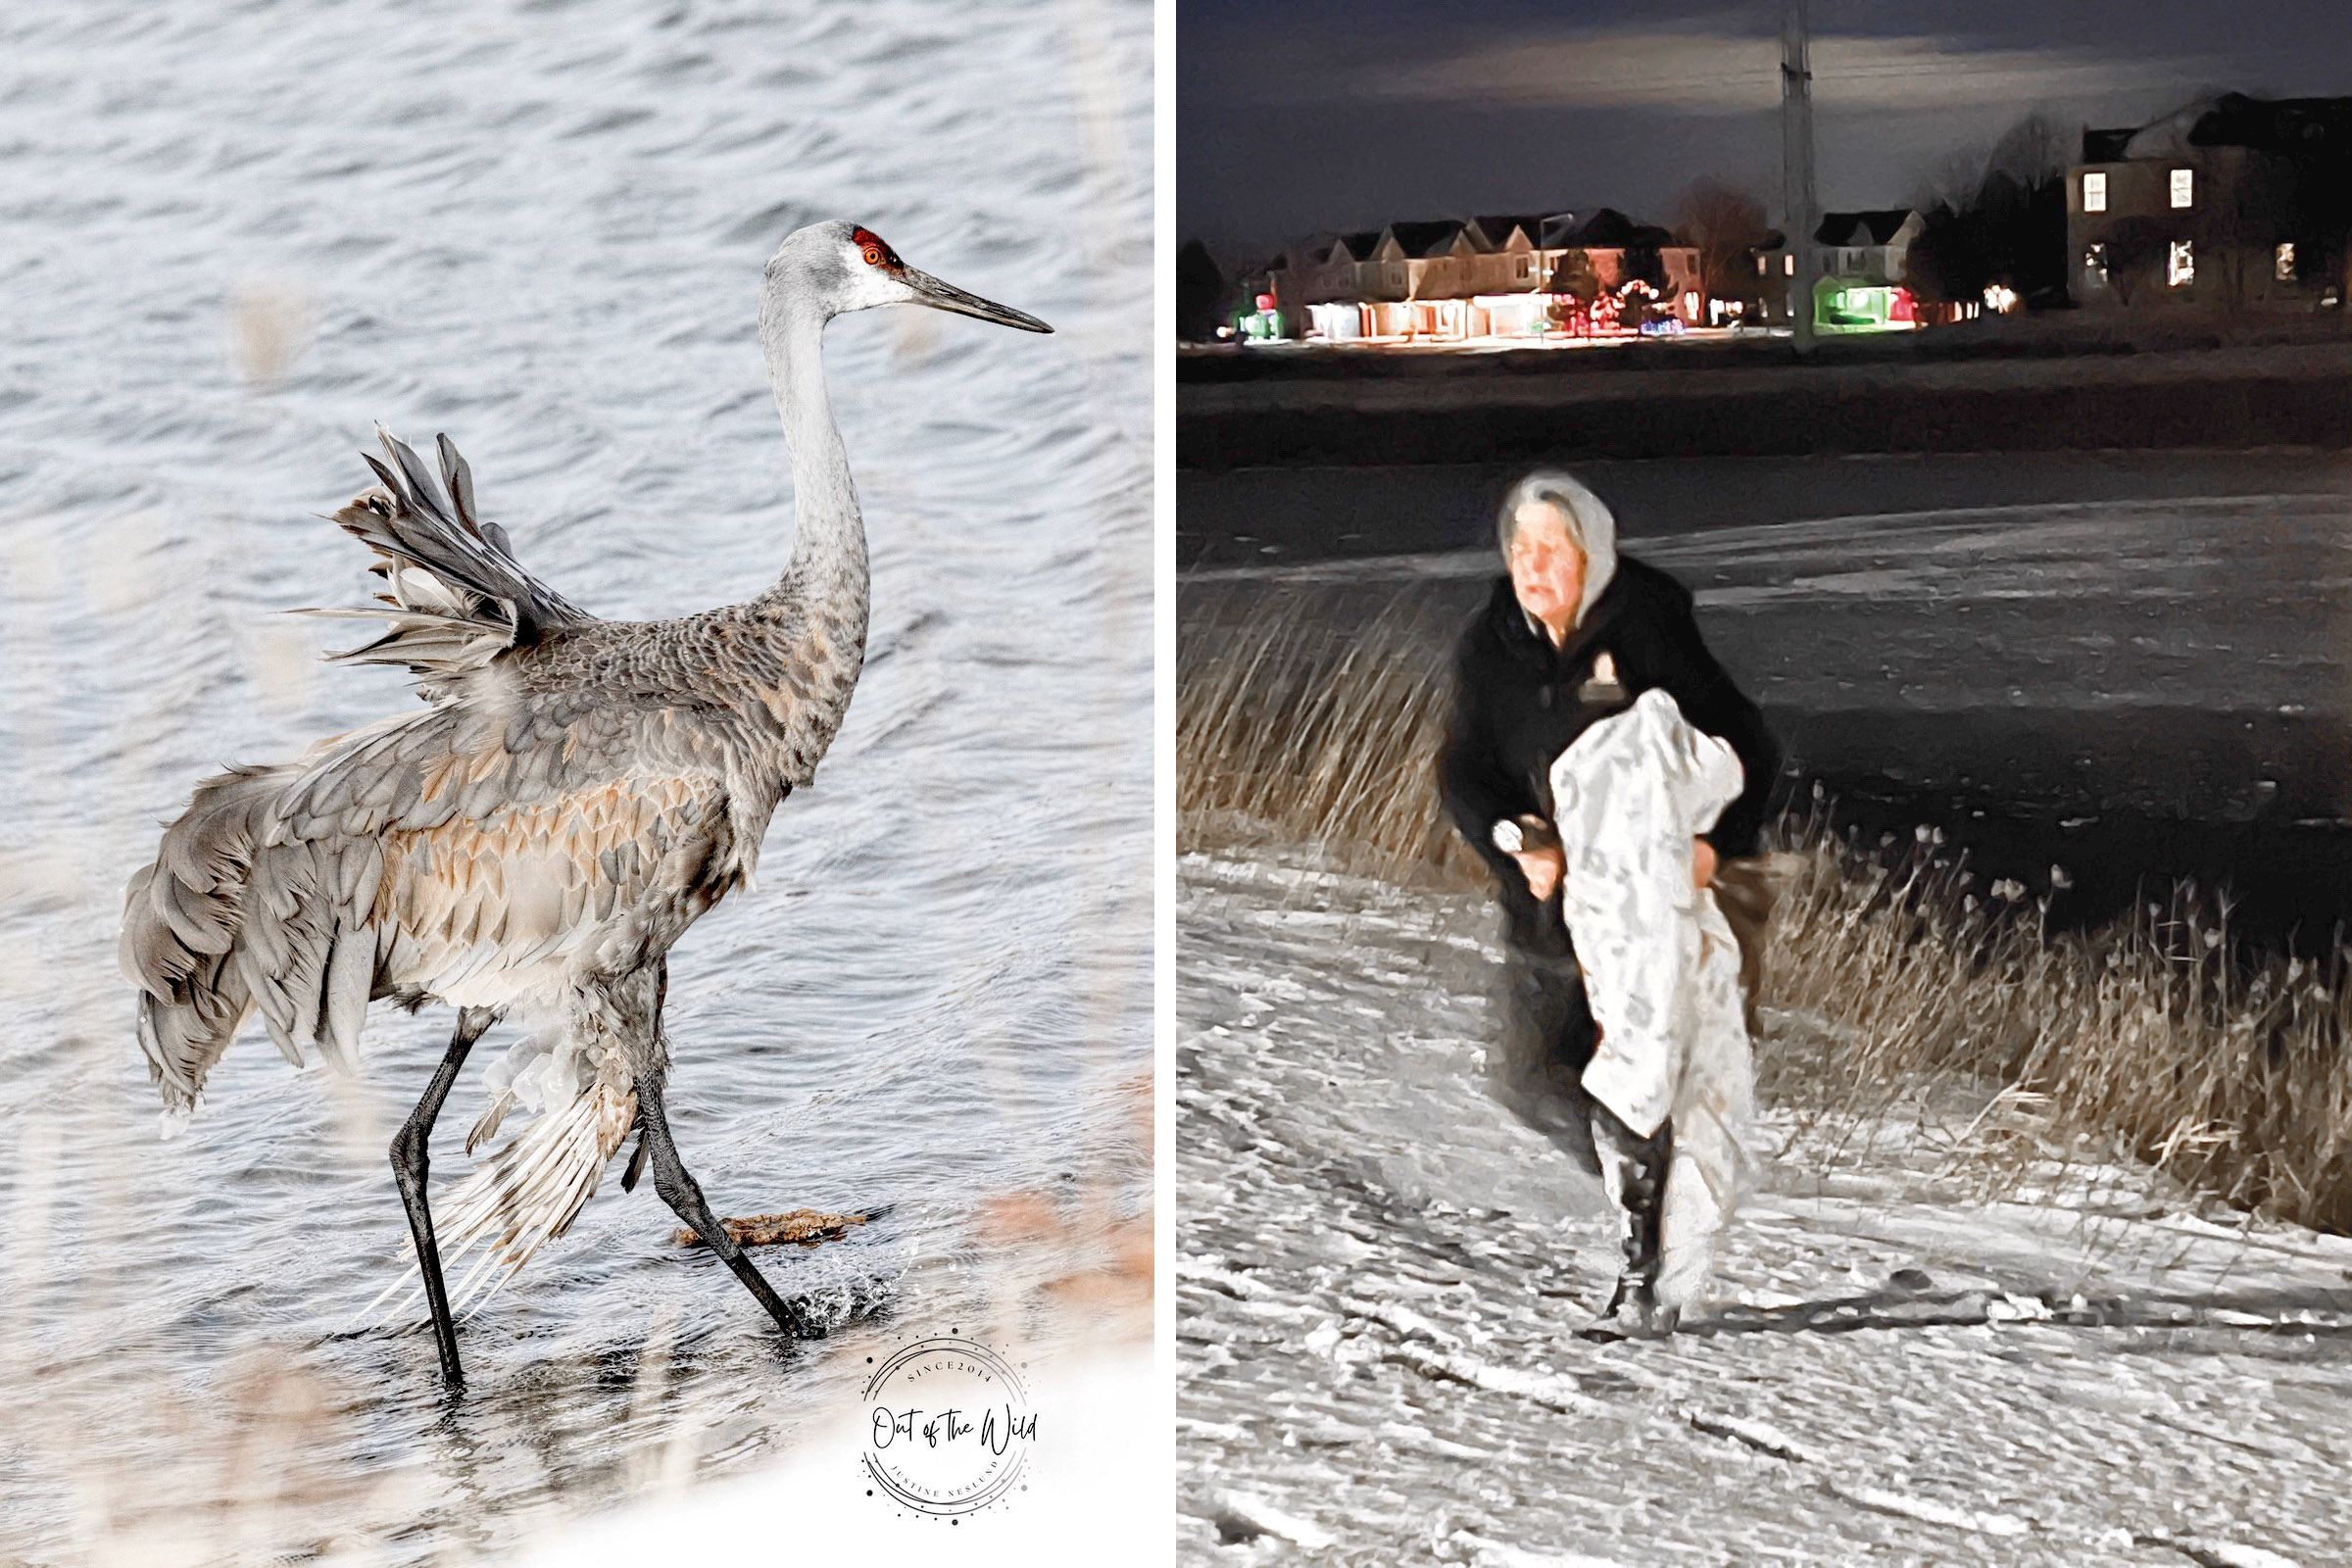 Dawn Keller (right), owner of Flint Creek Wildlife Rehabilitation, went above and beyond to rescue this crane . Donning waders she had to enter the water, with 8 degree air temps and climb the ice floe to reach it as it moved far back on the North end of the pond once she entered the water . It was a harrowing rescue in the pitch dark with only a flashlight and a blanket. Dawn told us she actually prefers rescuing these cranes in the dark so showing up at 5:30 pm worked in this cranes favor. (All photos provided by Justine Neslund)